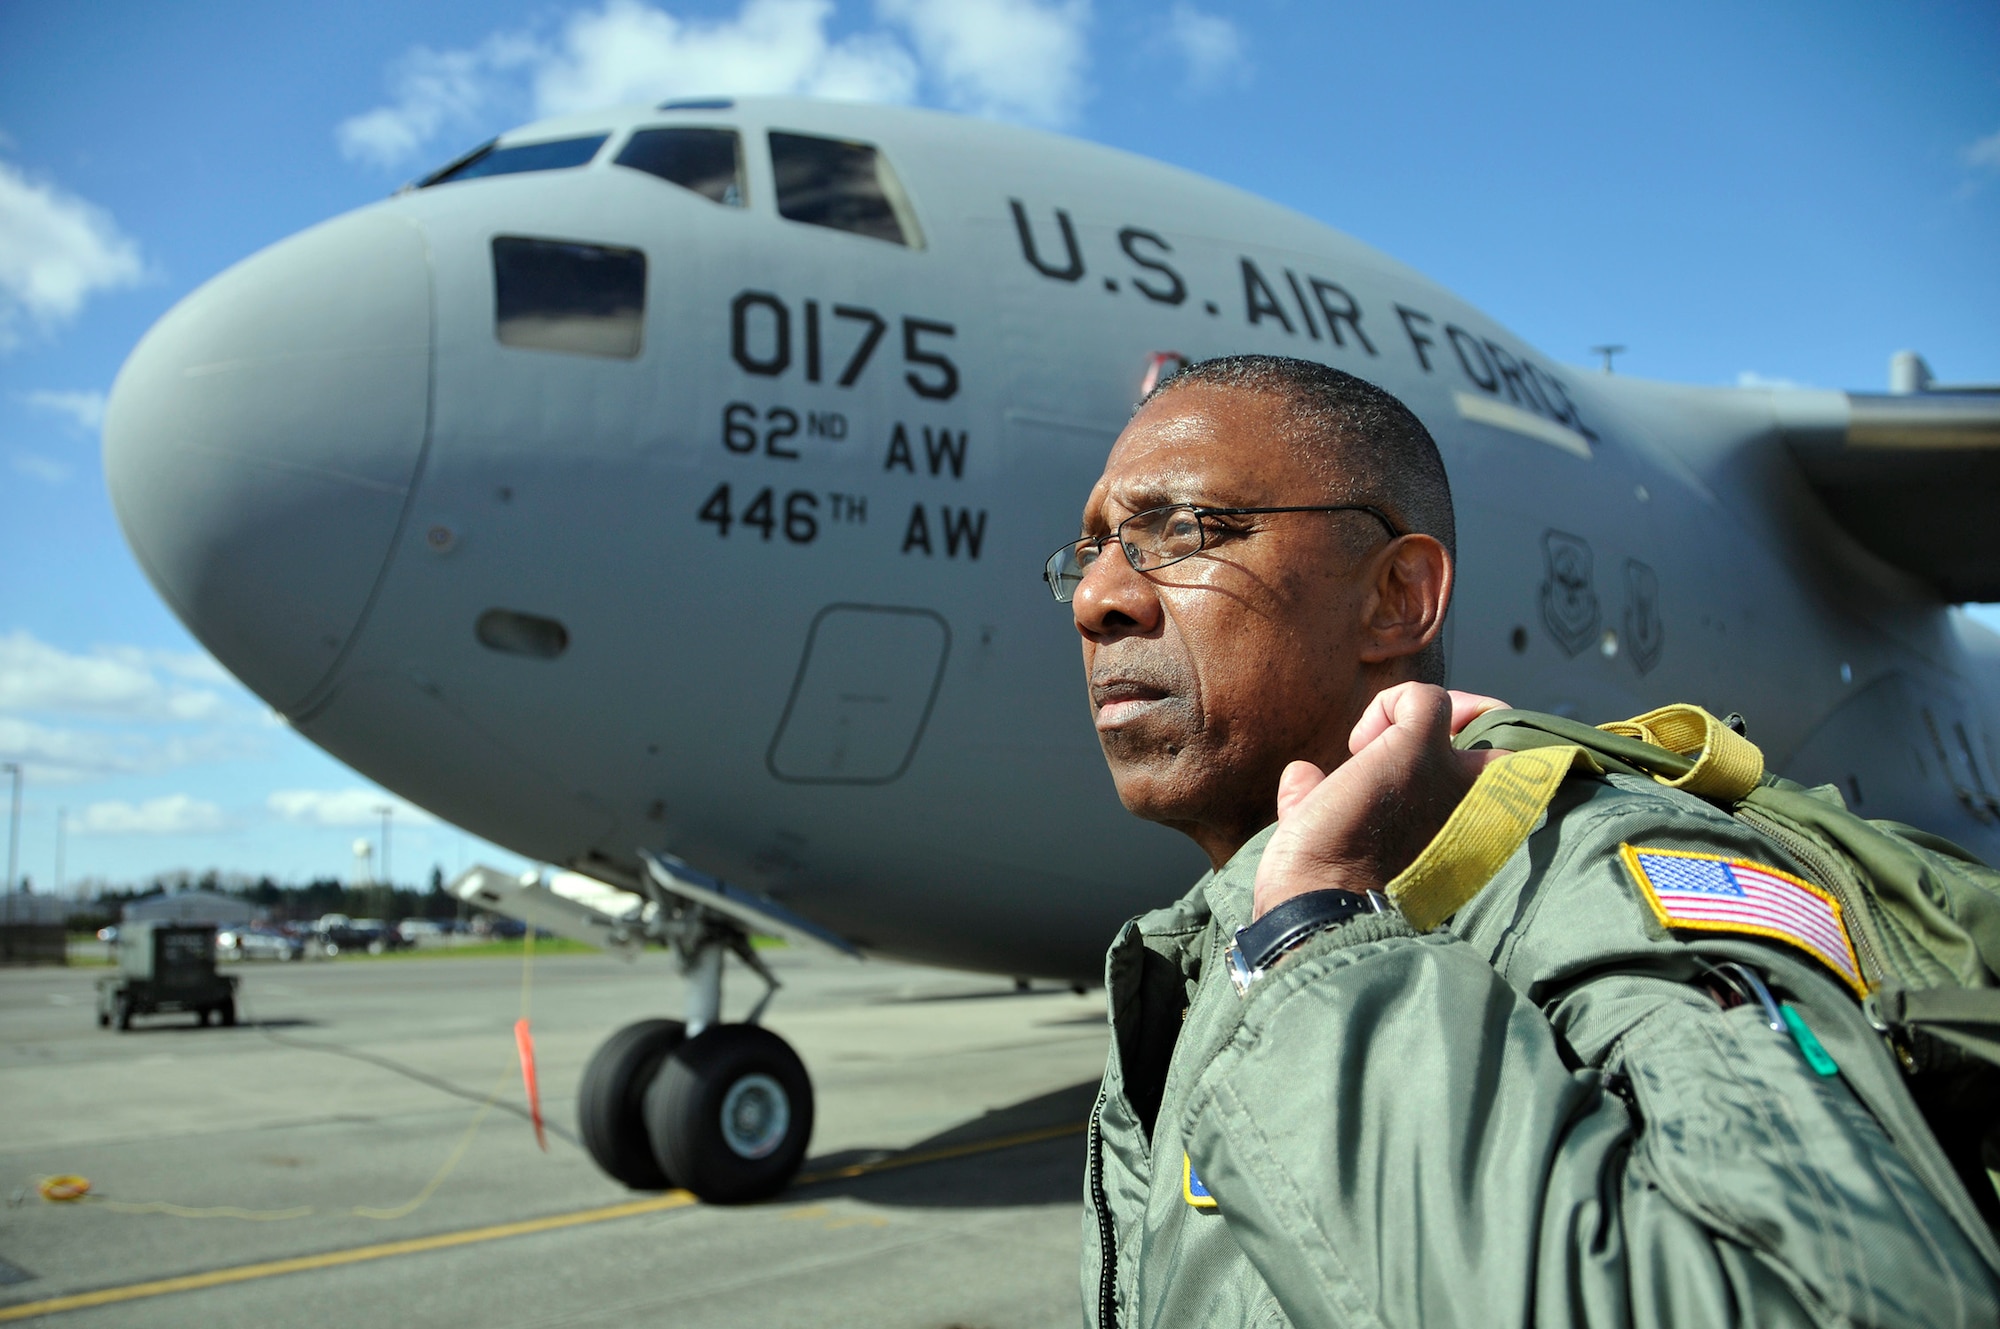 Senior Master Sgt. Terry Philon (pictured above), the 313th Airlift Squadron chief loadmaster out of McChord Field, Wash., entered the military in 1972. During his 41 years of service, he has supported contingencies such as the evacuation of the American hostages in Iran in 1981, Operations Just Cause, Provide Hope, Desert Shield, Desert Storm, Iraqi Freedom, New Dawn, Enduring Freedom, and Deep Freeze. He is set to retire from the Air Force Reserve in December, right before his 60th birthday. (U.S. Air Force photo/Master Sgt. Jake Chappelle) 